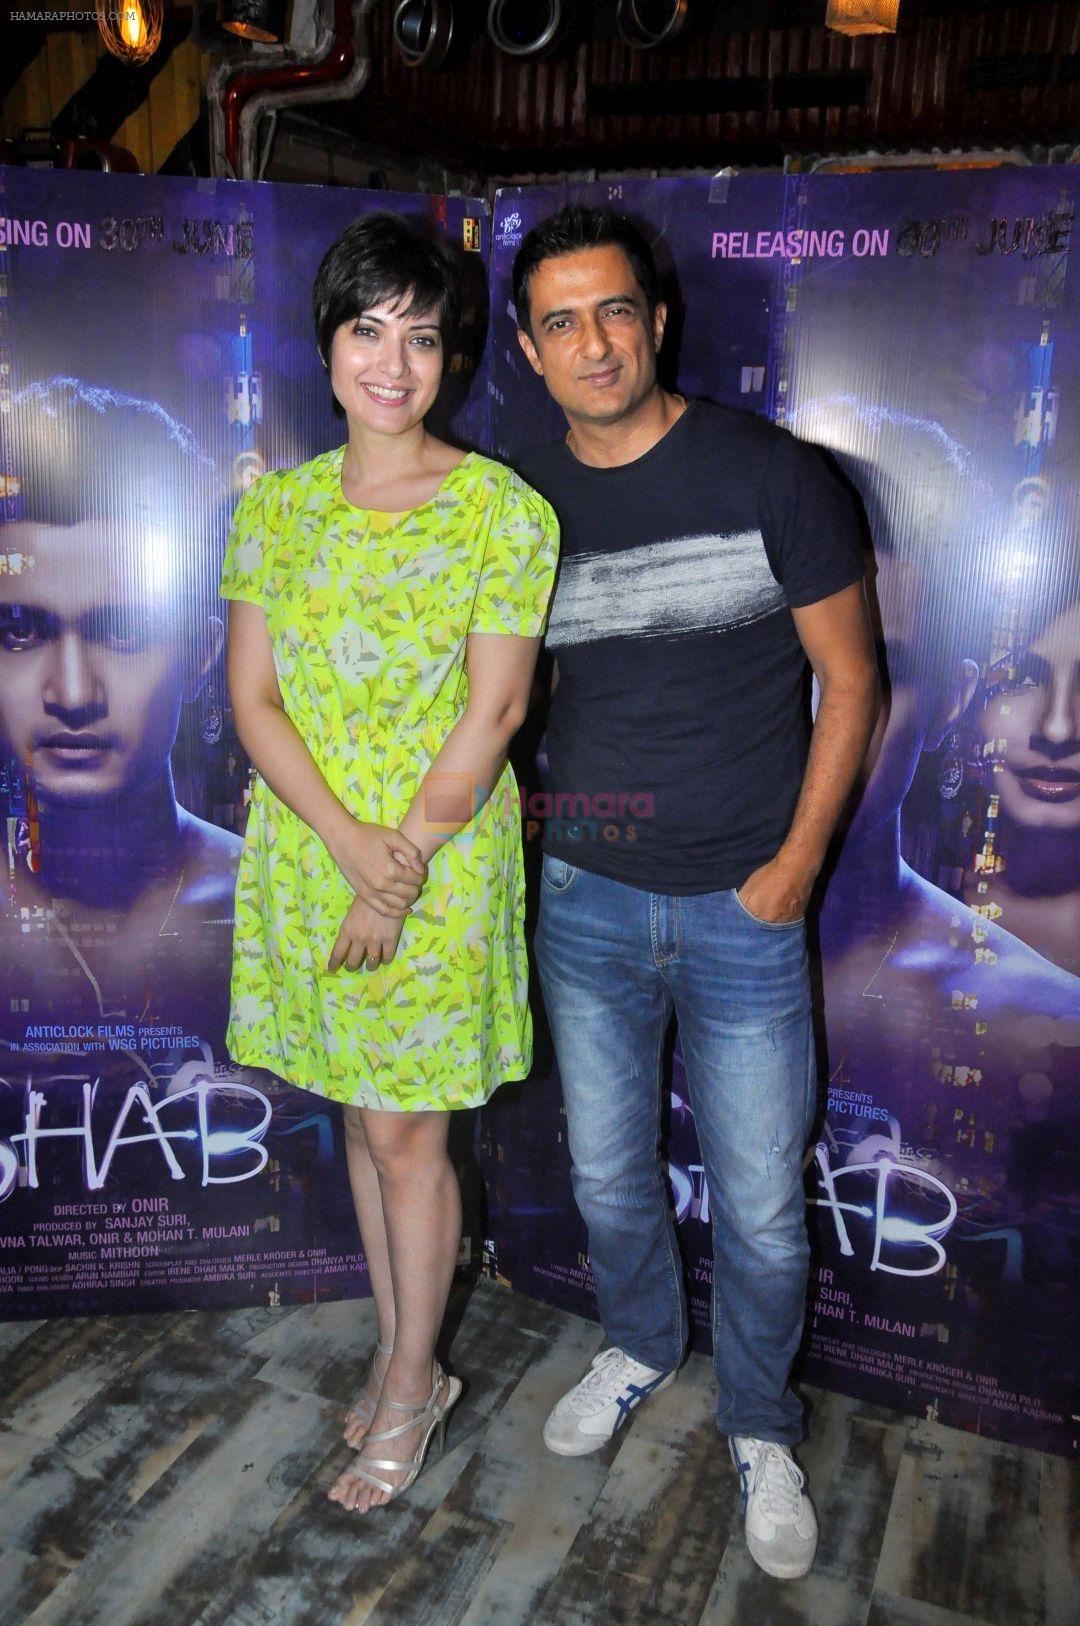 Interview With producer Sanjay Suri, Arpita Chatterjee For Film Shab